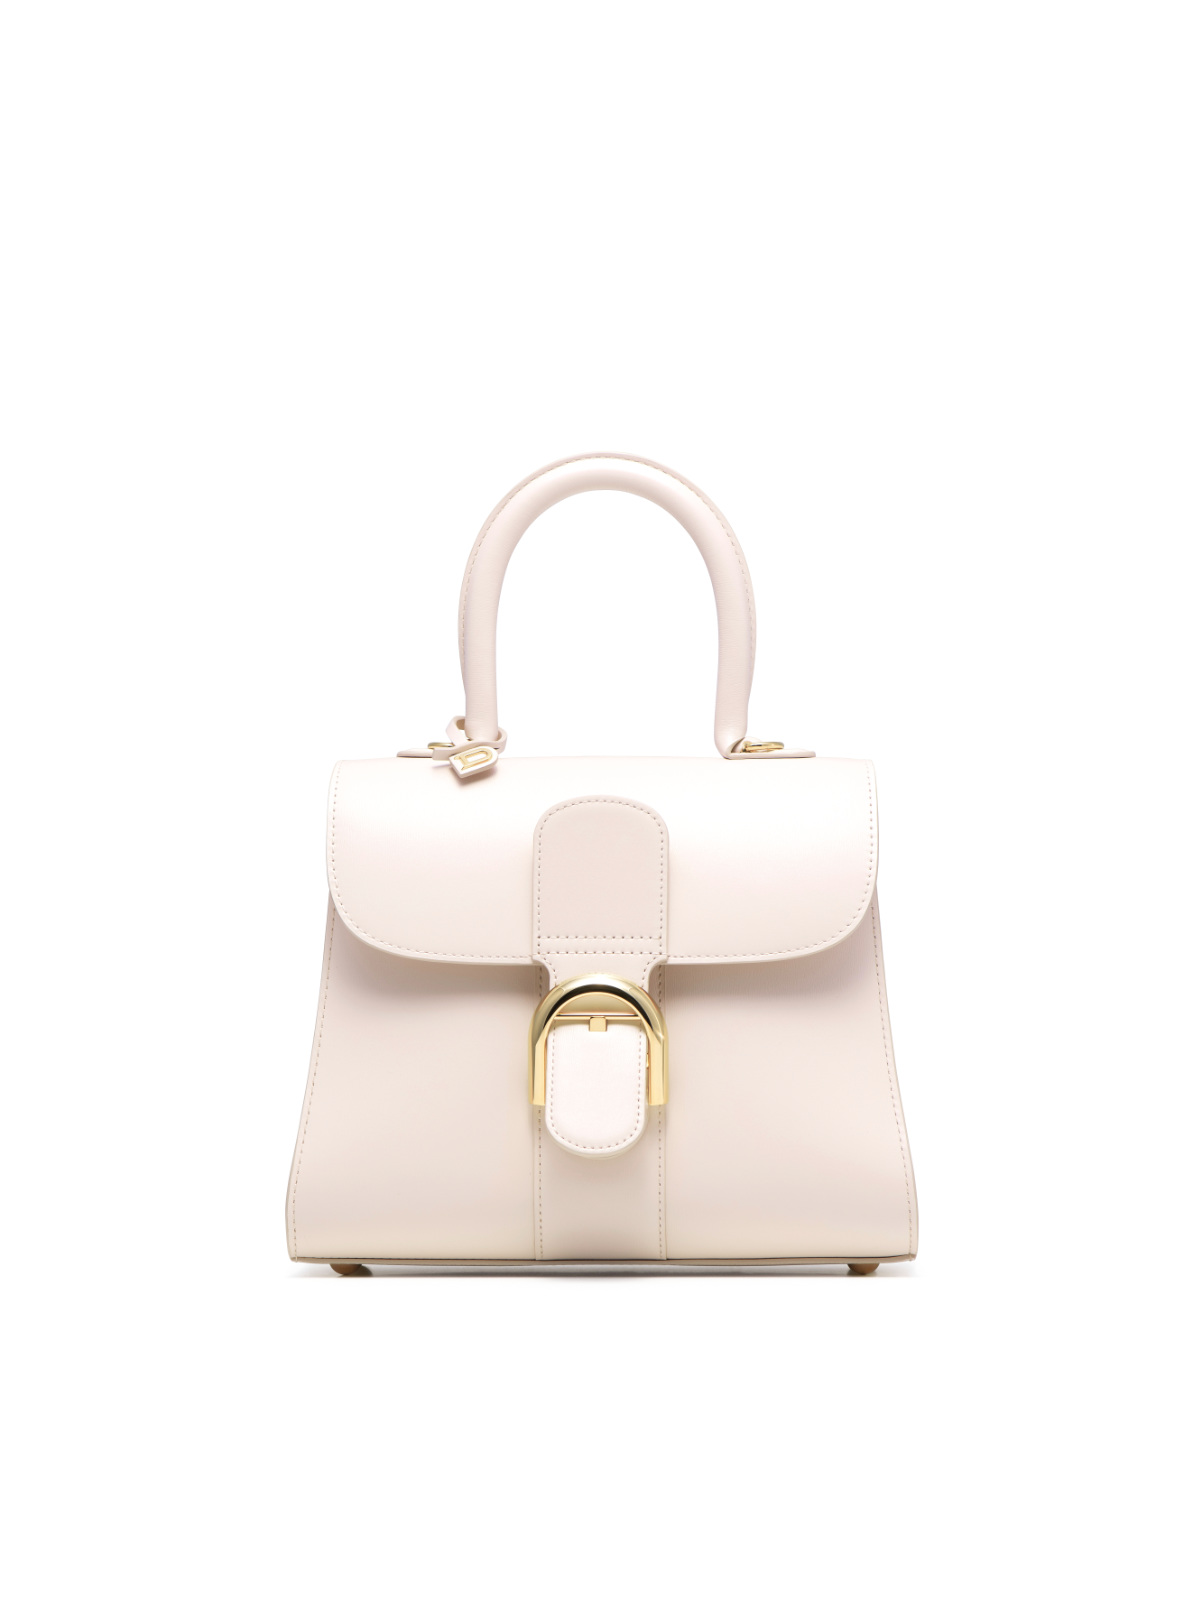 Delvaux Presents Its New SS22 Bag Collection